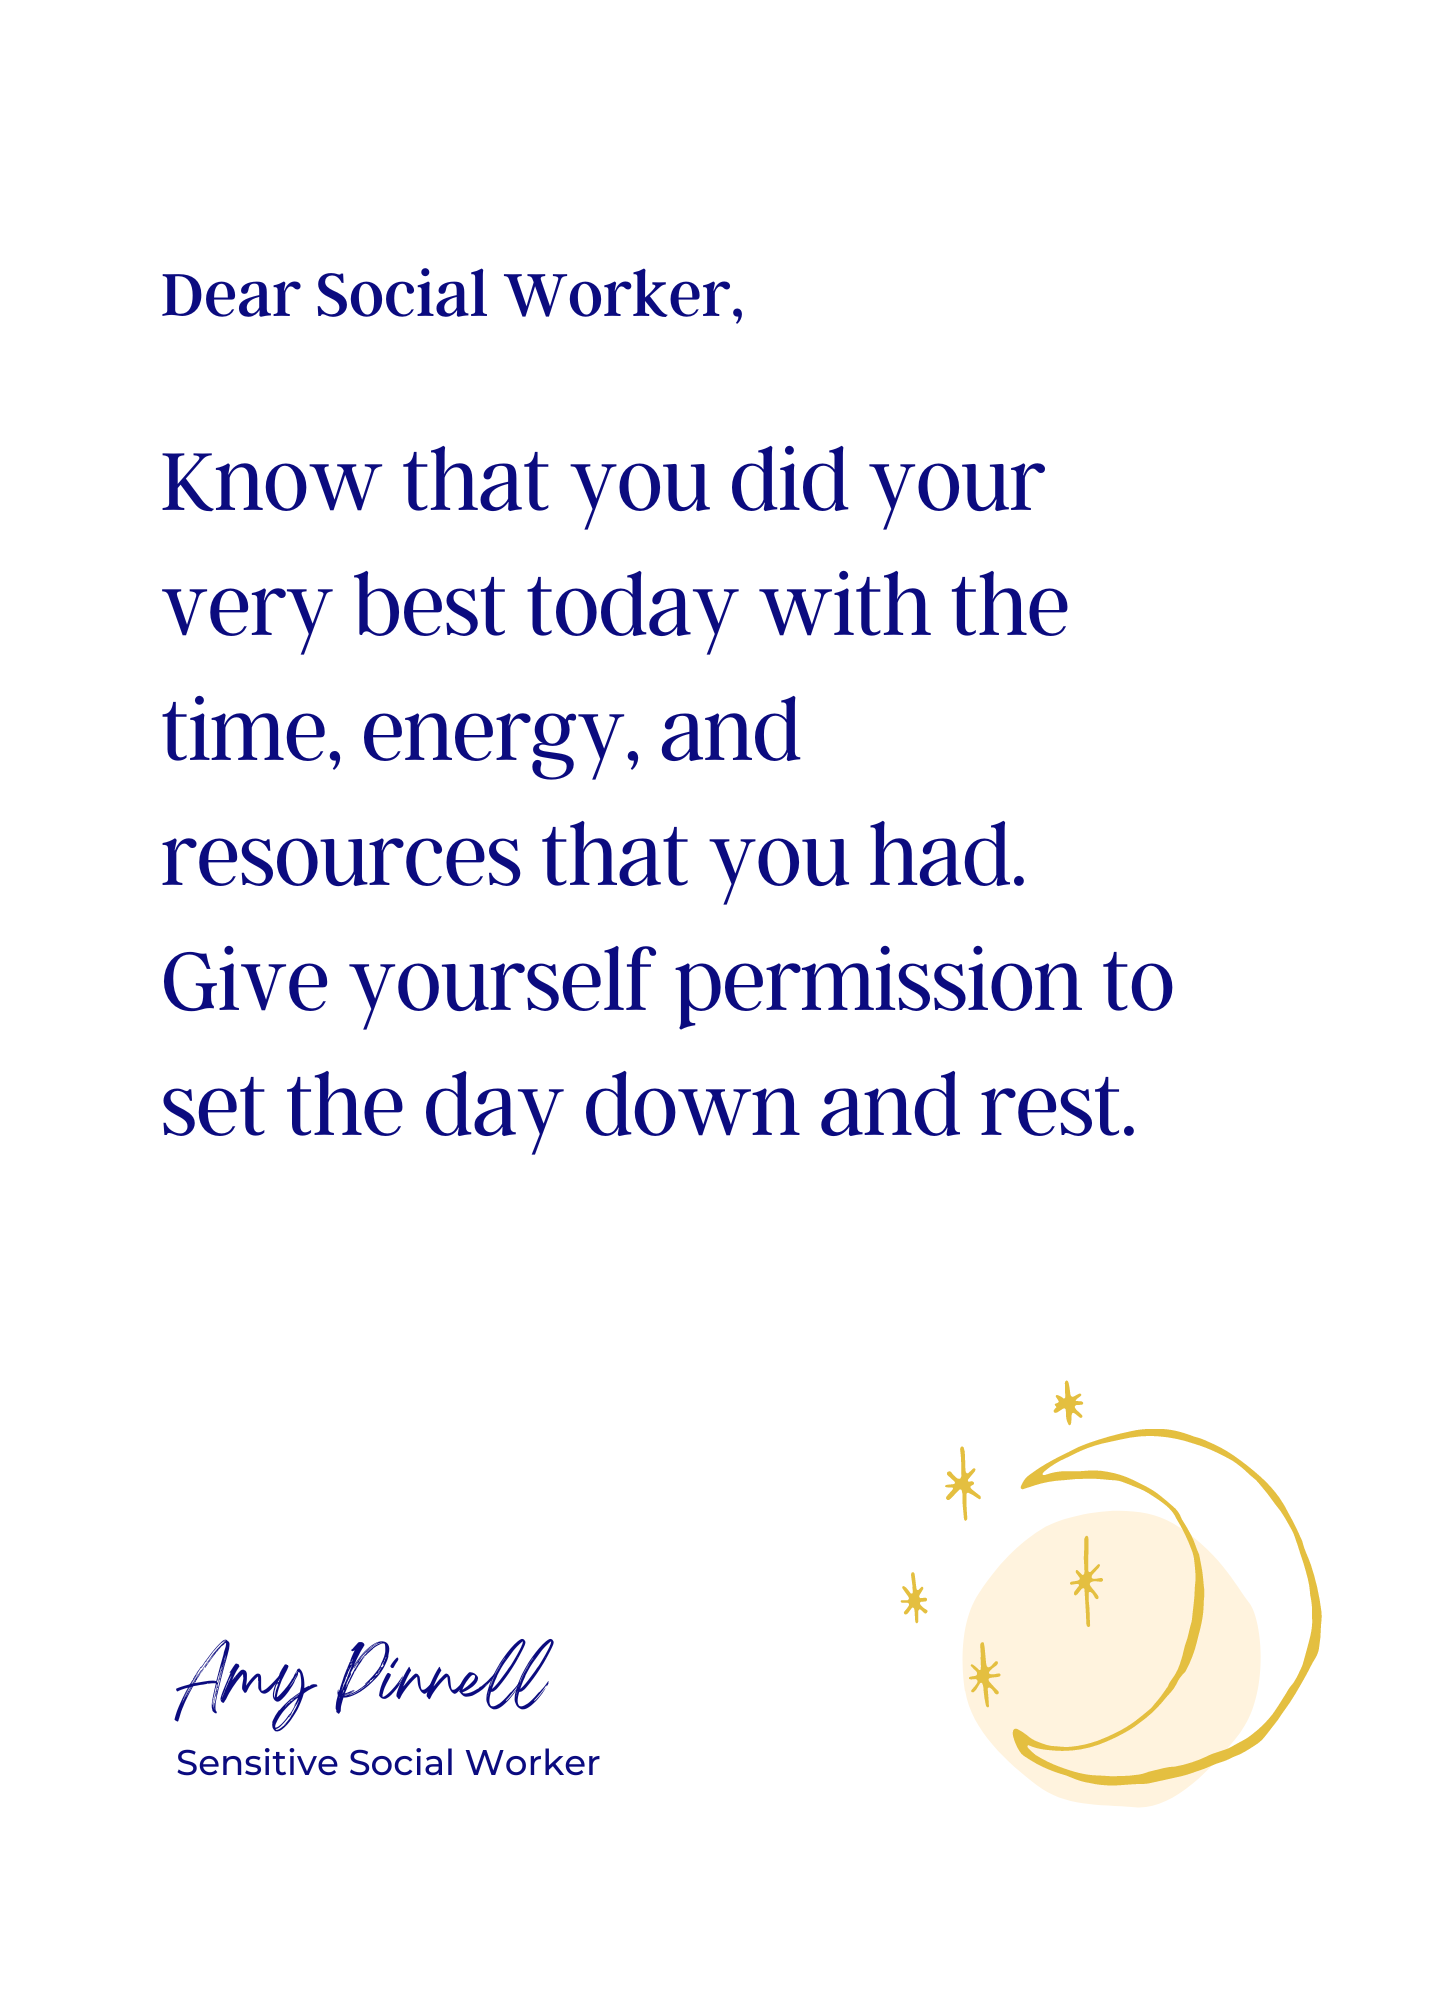 An electronic version of the print is shown. The print is white with purple font which reads "Dear Social Worker, Know that you did your very best today with the time, energy, and resources that you had. Give yourself permission to set the day down and rest. Amy Pinnell, Sensitive Social Worker." There is a yellow sketch of a crescent moon and 5 stars in the right bottom corner.